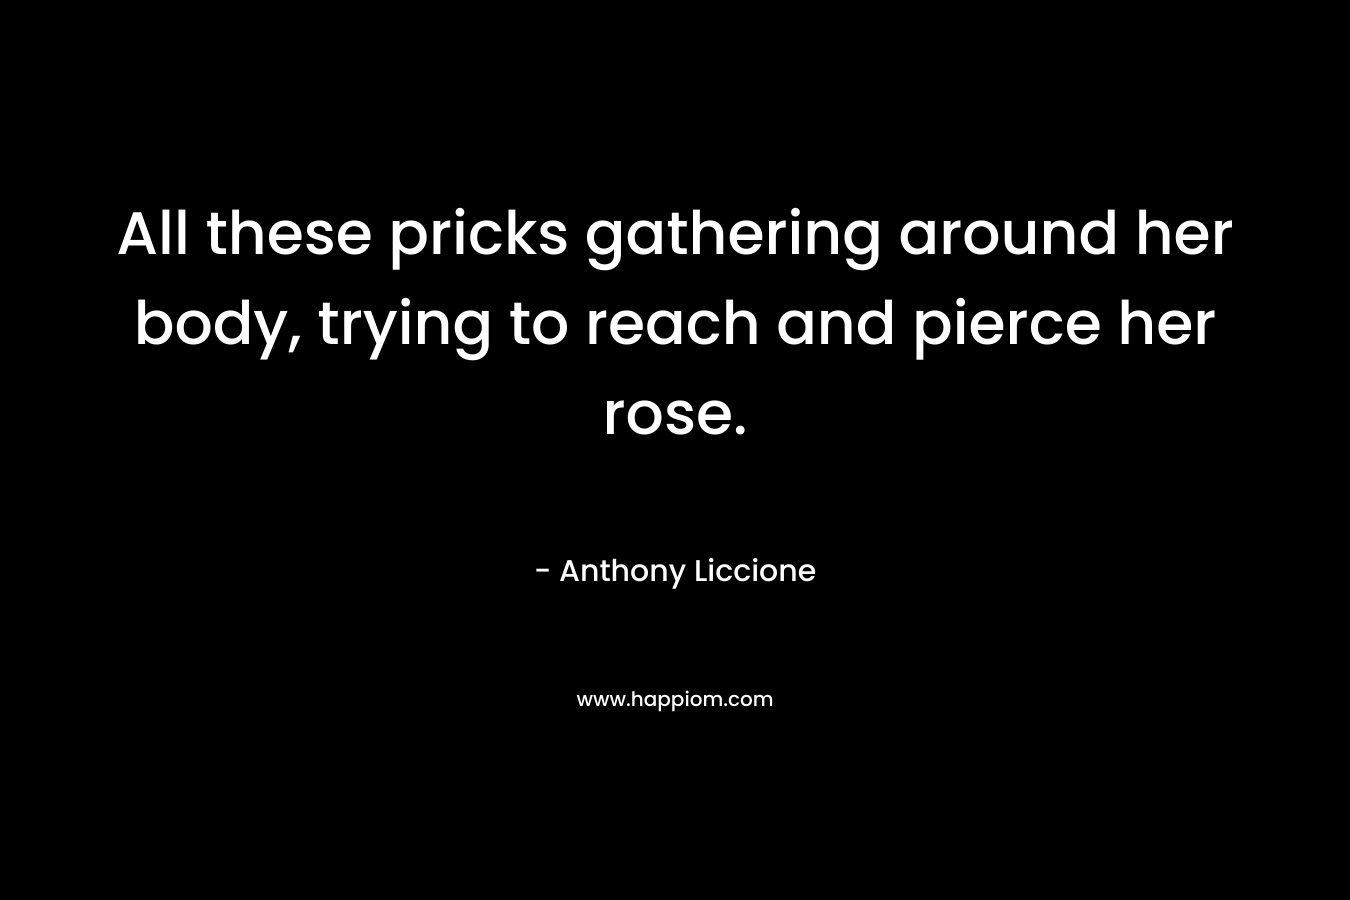 All these pricks gathering around her body, trying to reach and pierce her rose. – Anthony Liccione